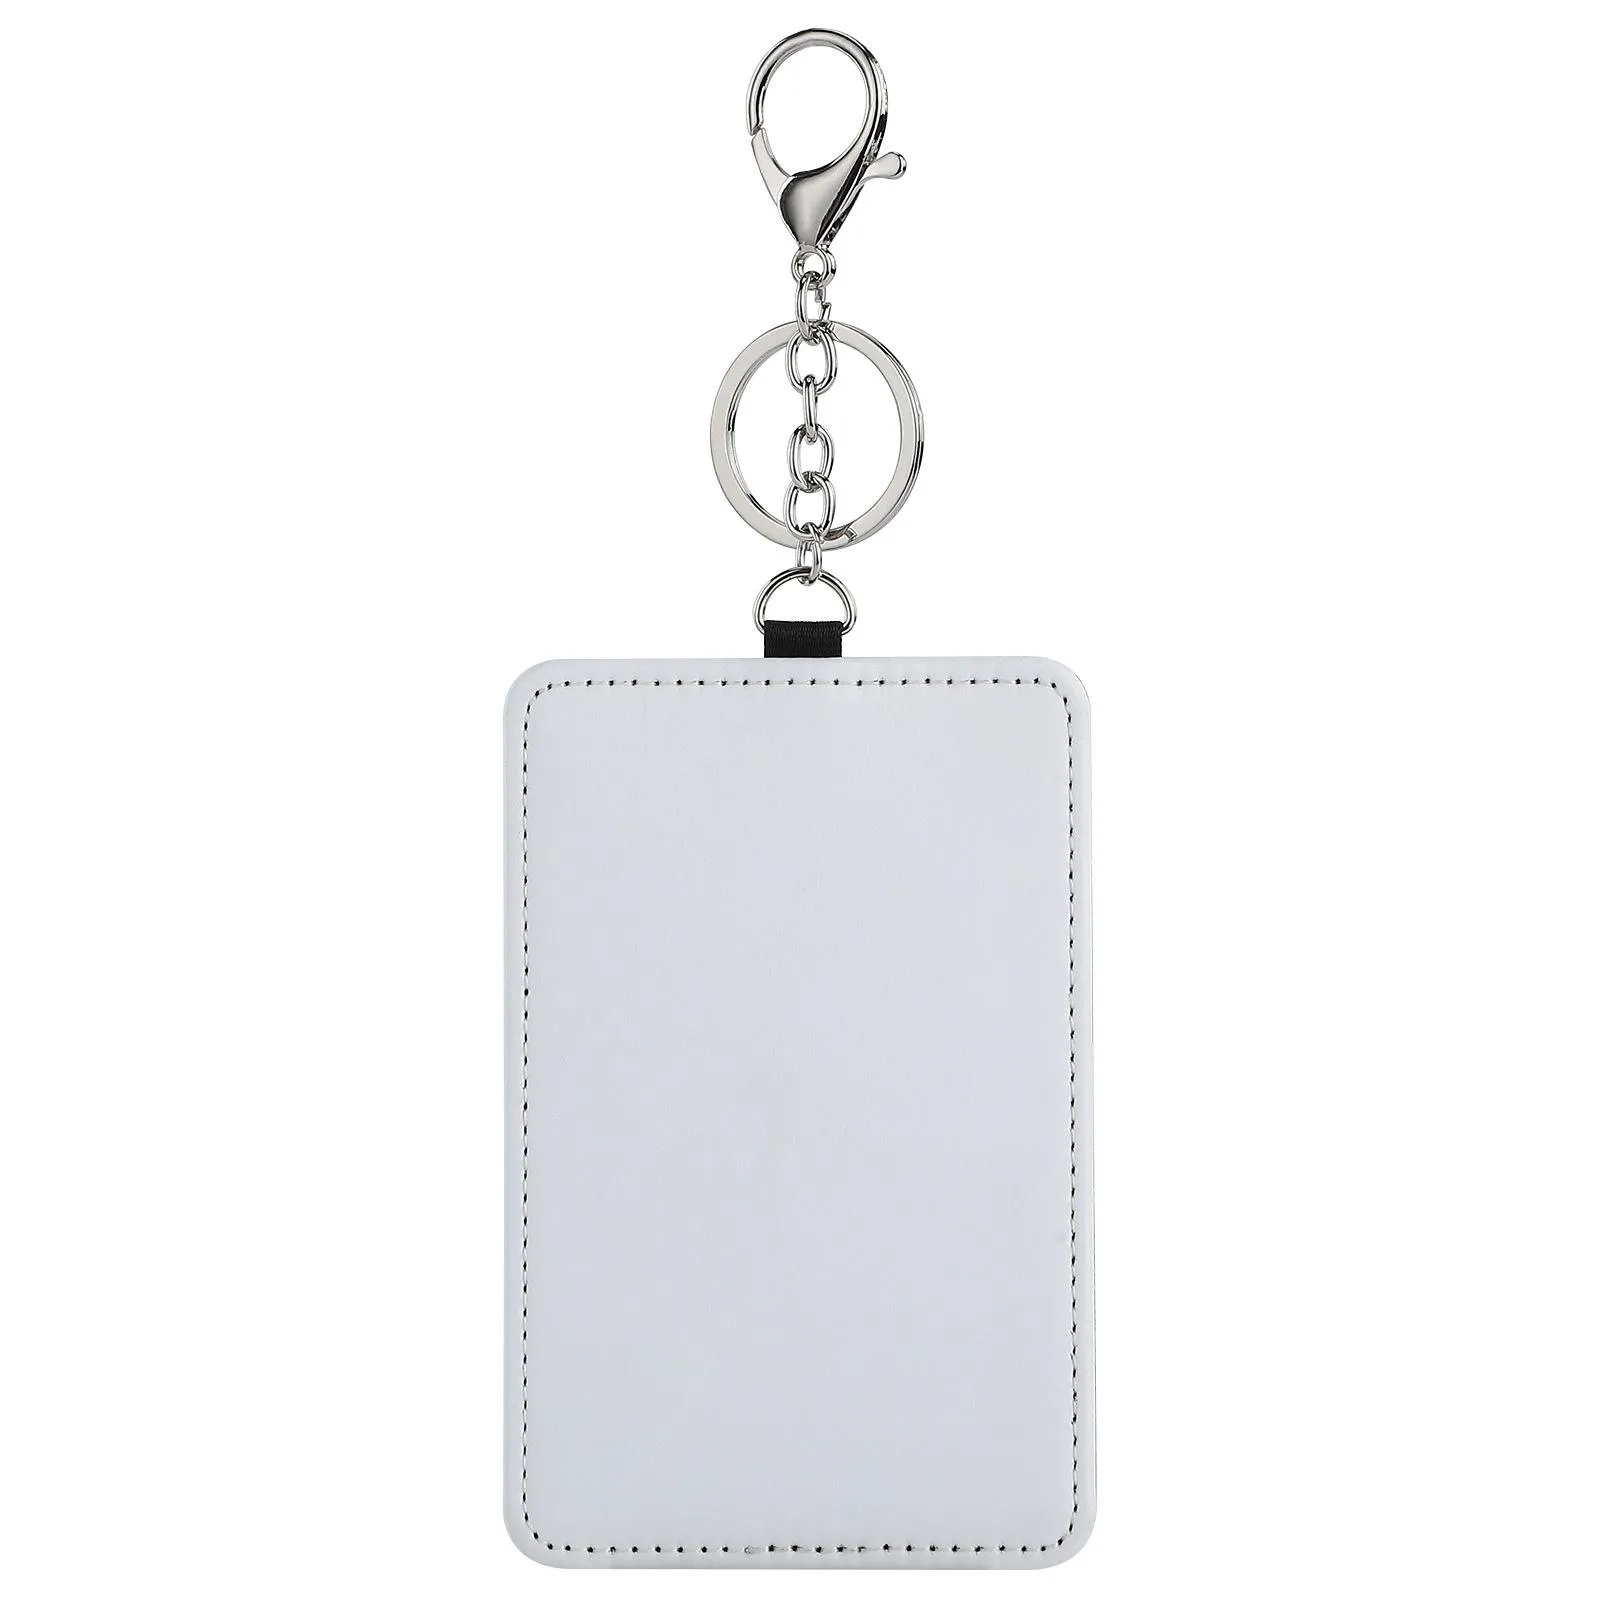 Sublimation Card Holder PU Leather Blank Credit Cards Bag Case Heat Transfer Print DIY Holders With Keychain DH7885